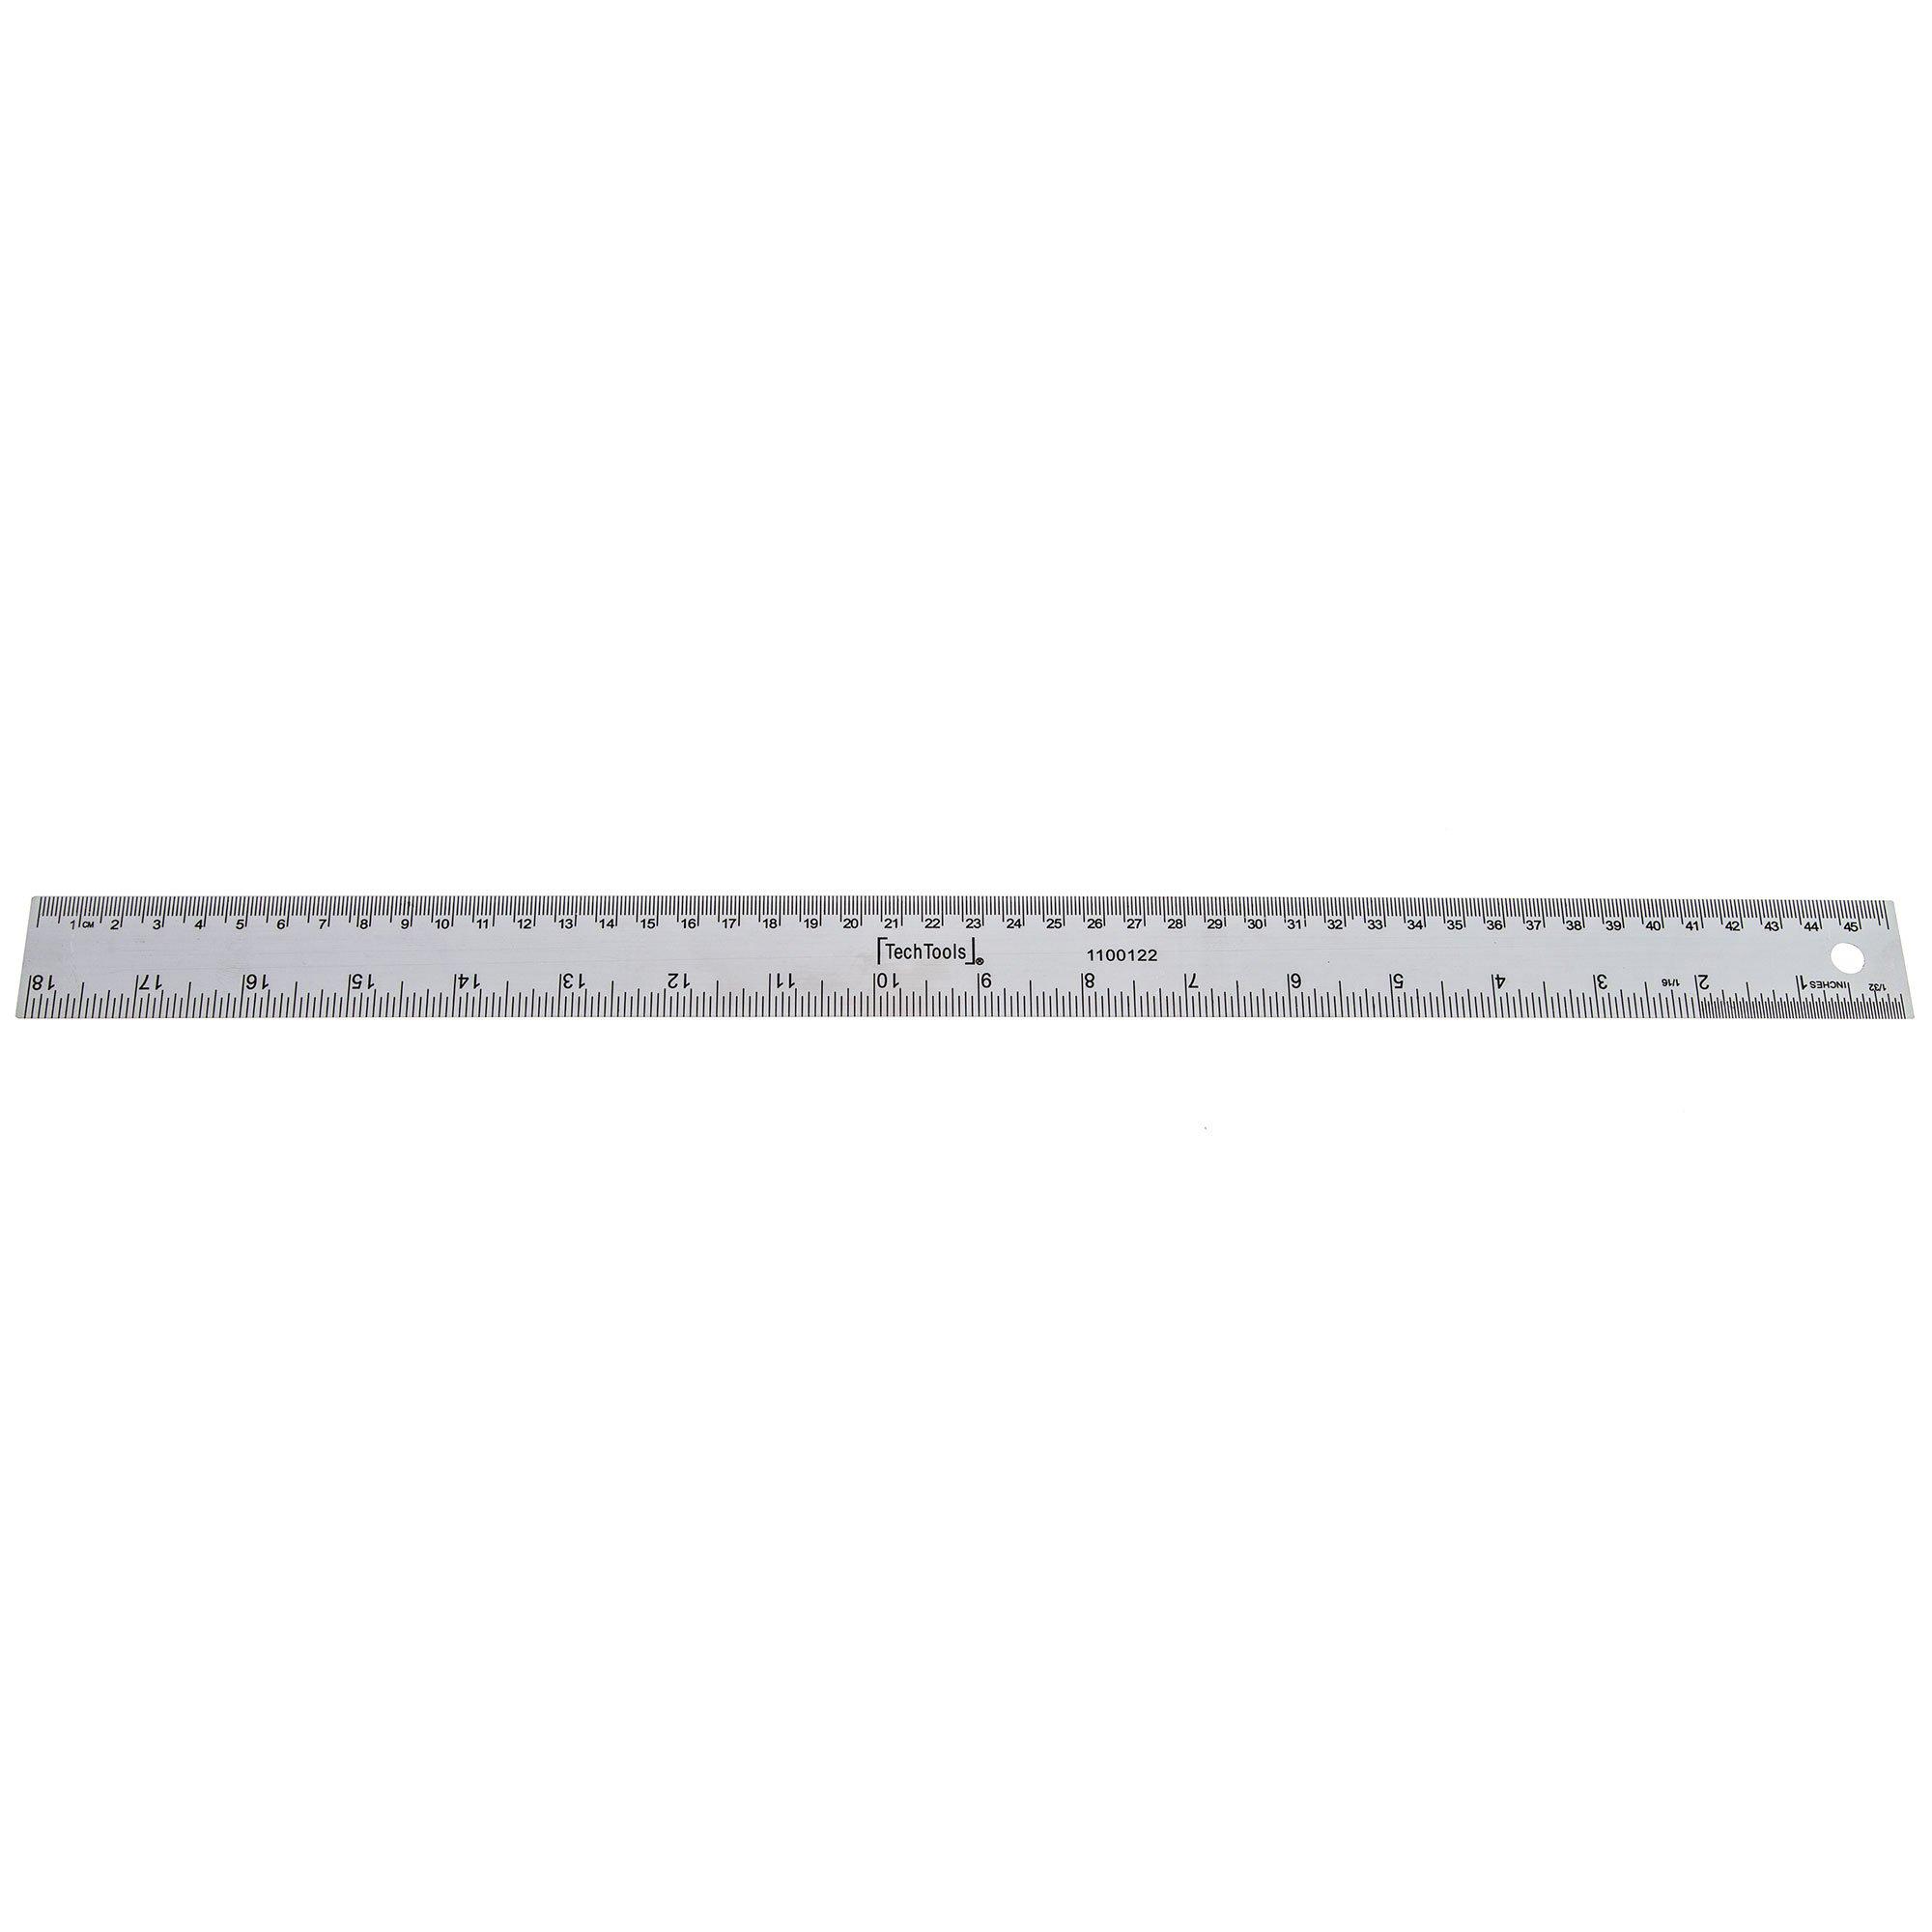  Acurit Stainless Steel Ruler Cork Back Measuring Ruler, Used  for Drafting, Measuring, Drawing, Art - 18 Inch Ruler : Tools & Home  Improvement